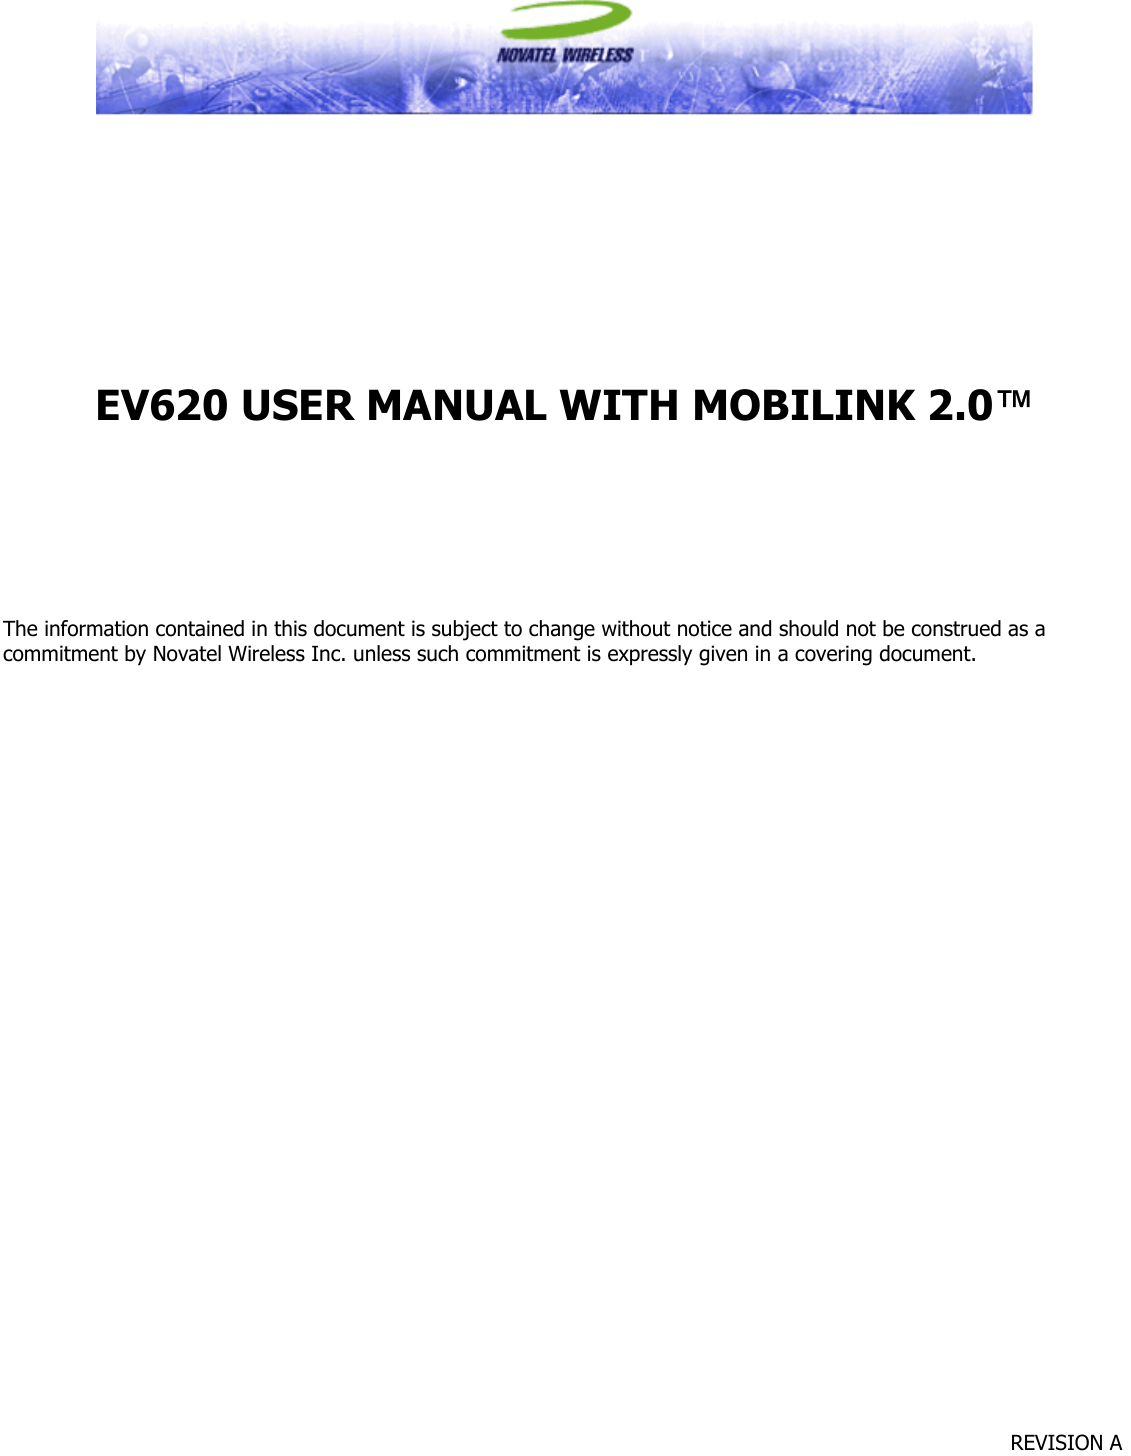             REVISION A                  EV620 USER MANUAL WITH MOBILINK 2.0™       The information contained in this document is subject to change without notice and should not be construed as a commitment by Novatel Wireless Inc. unless such commitment is expressly given in a covering document. 